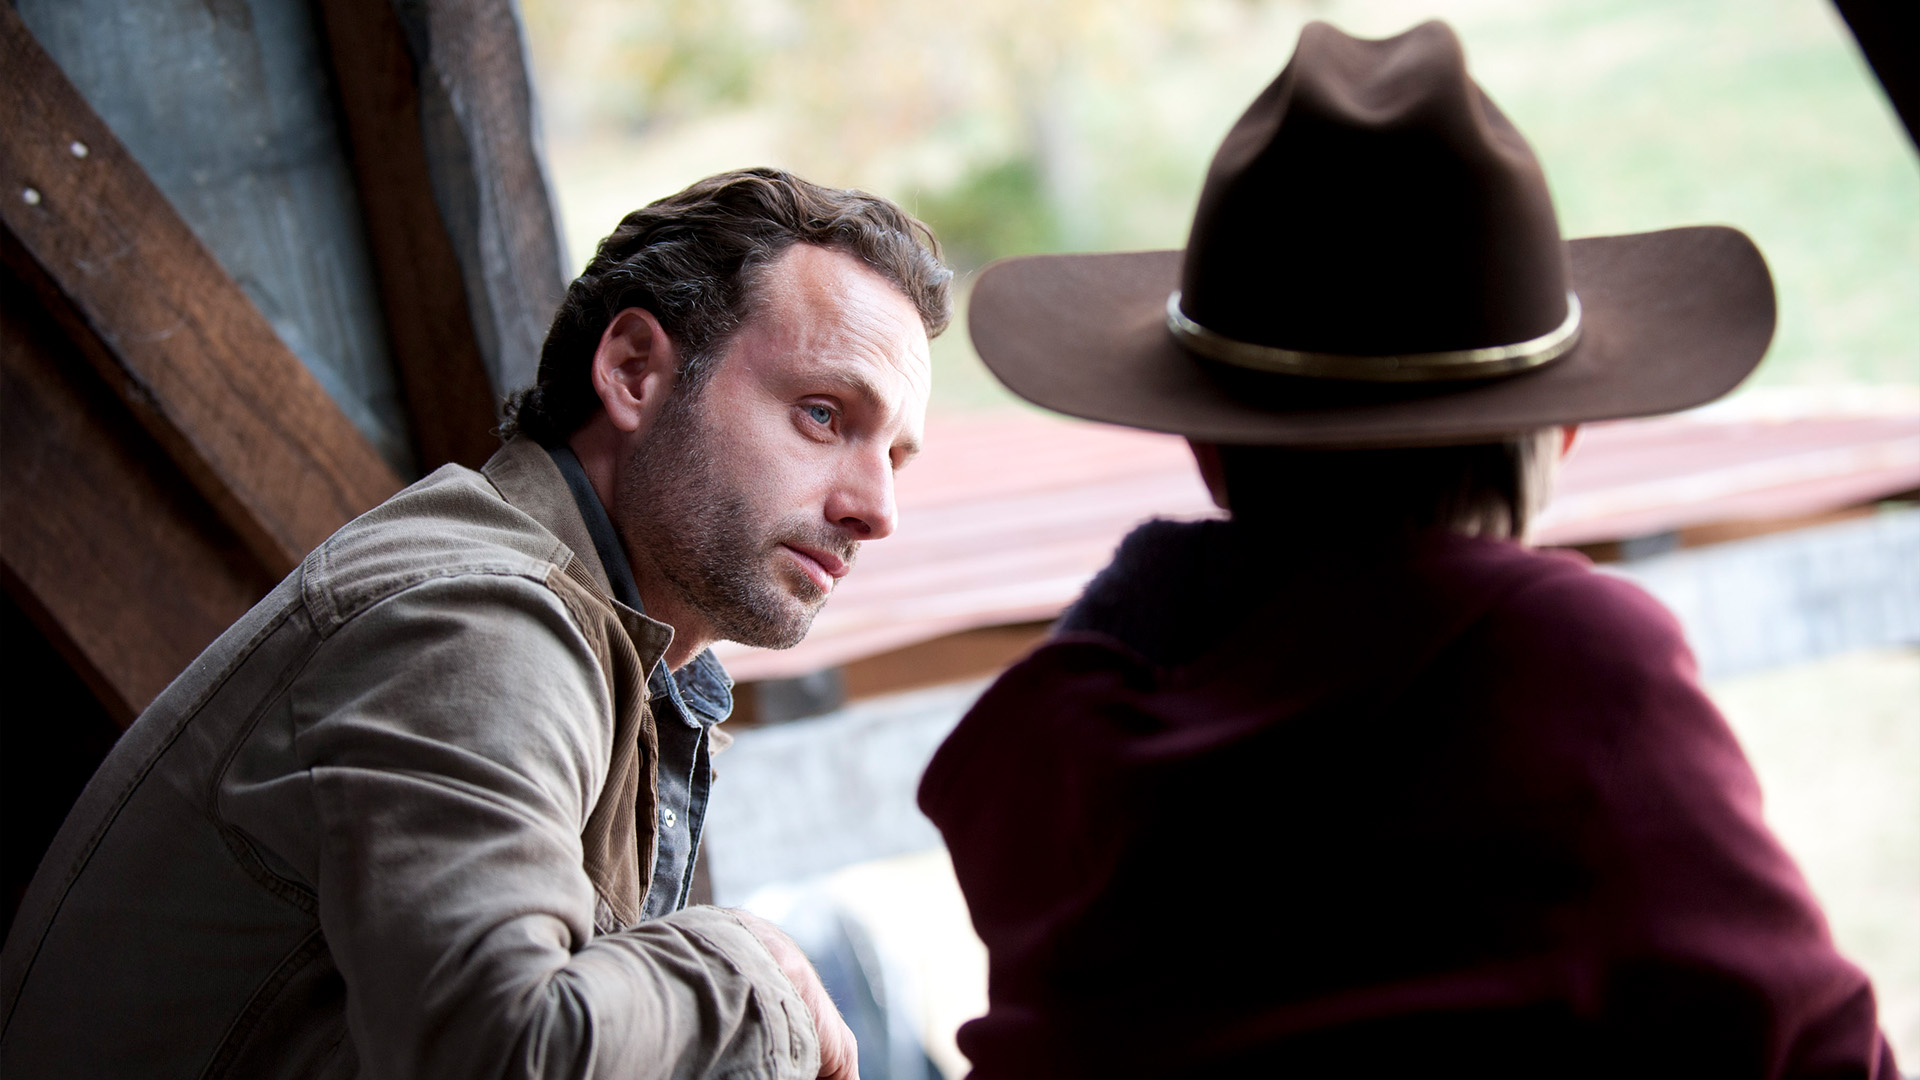 Better Angels: Best of Rick Edition, Relive Rick's best moments in this iconic episode from Season 2., Season 1066712, Episode 2